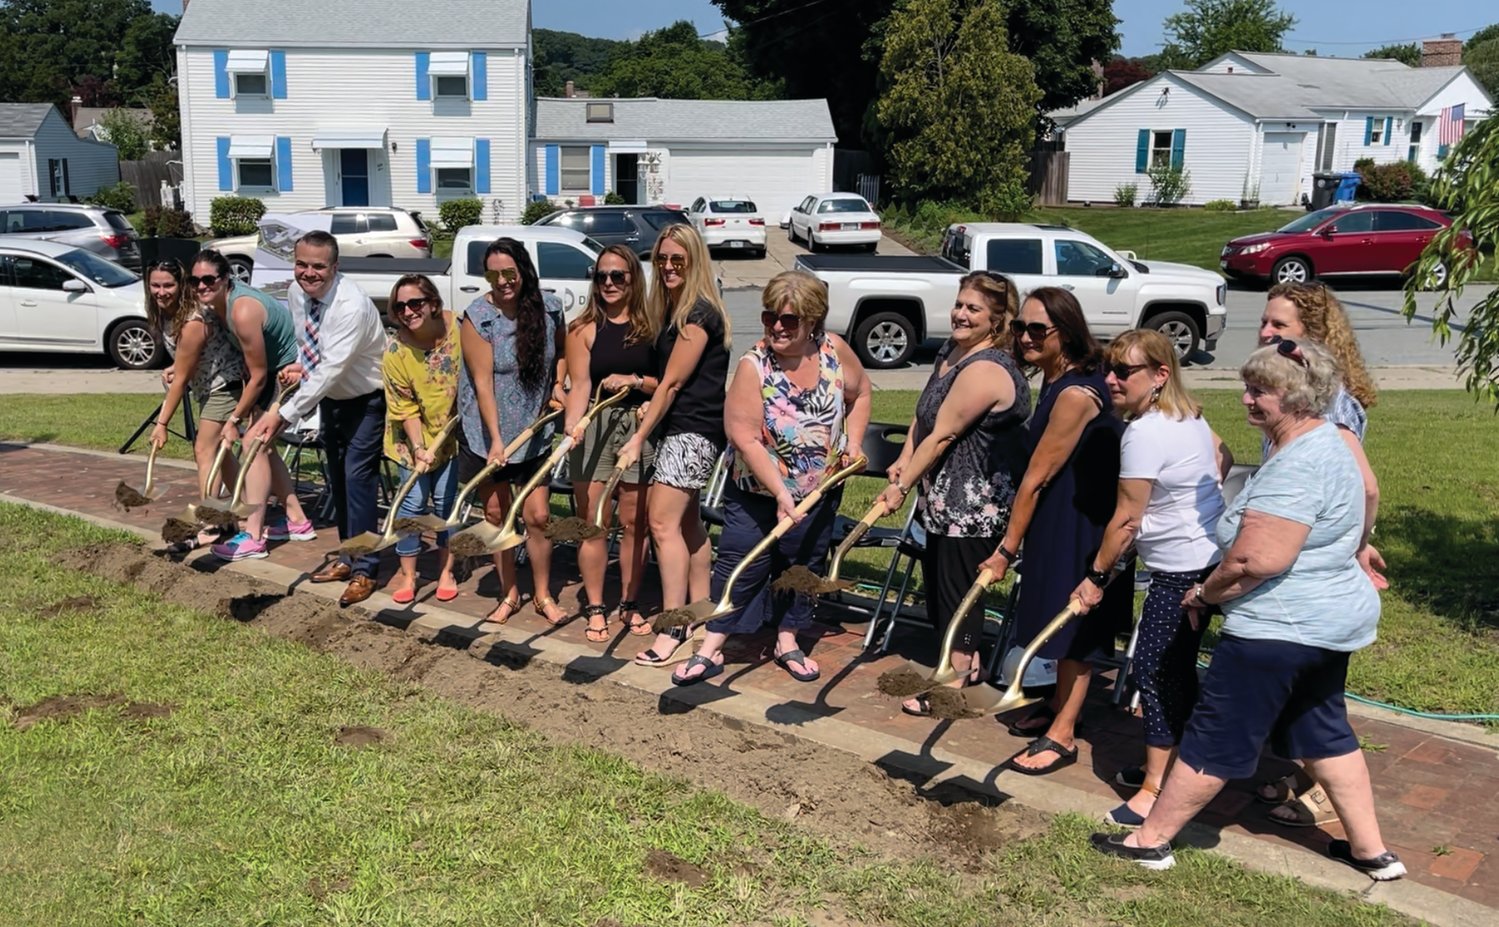 BULLDOG PRIDE:  Educators from Garden City School grabbed the golden shovels to stage their own groundbreaking following the formal ceremony last week.